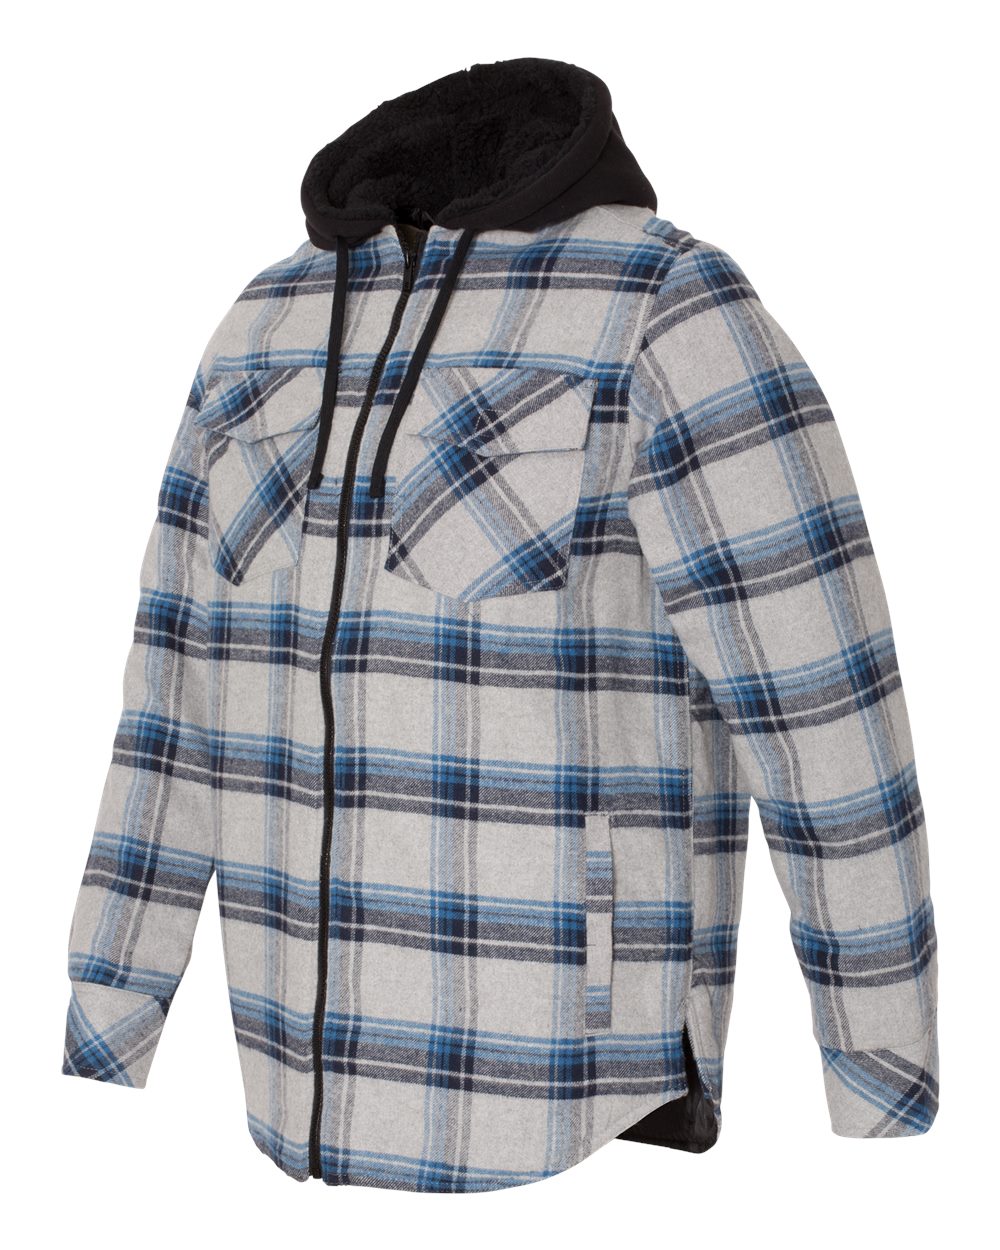 Grey and Blue Flannel Jacket 